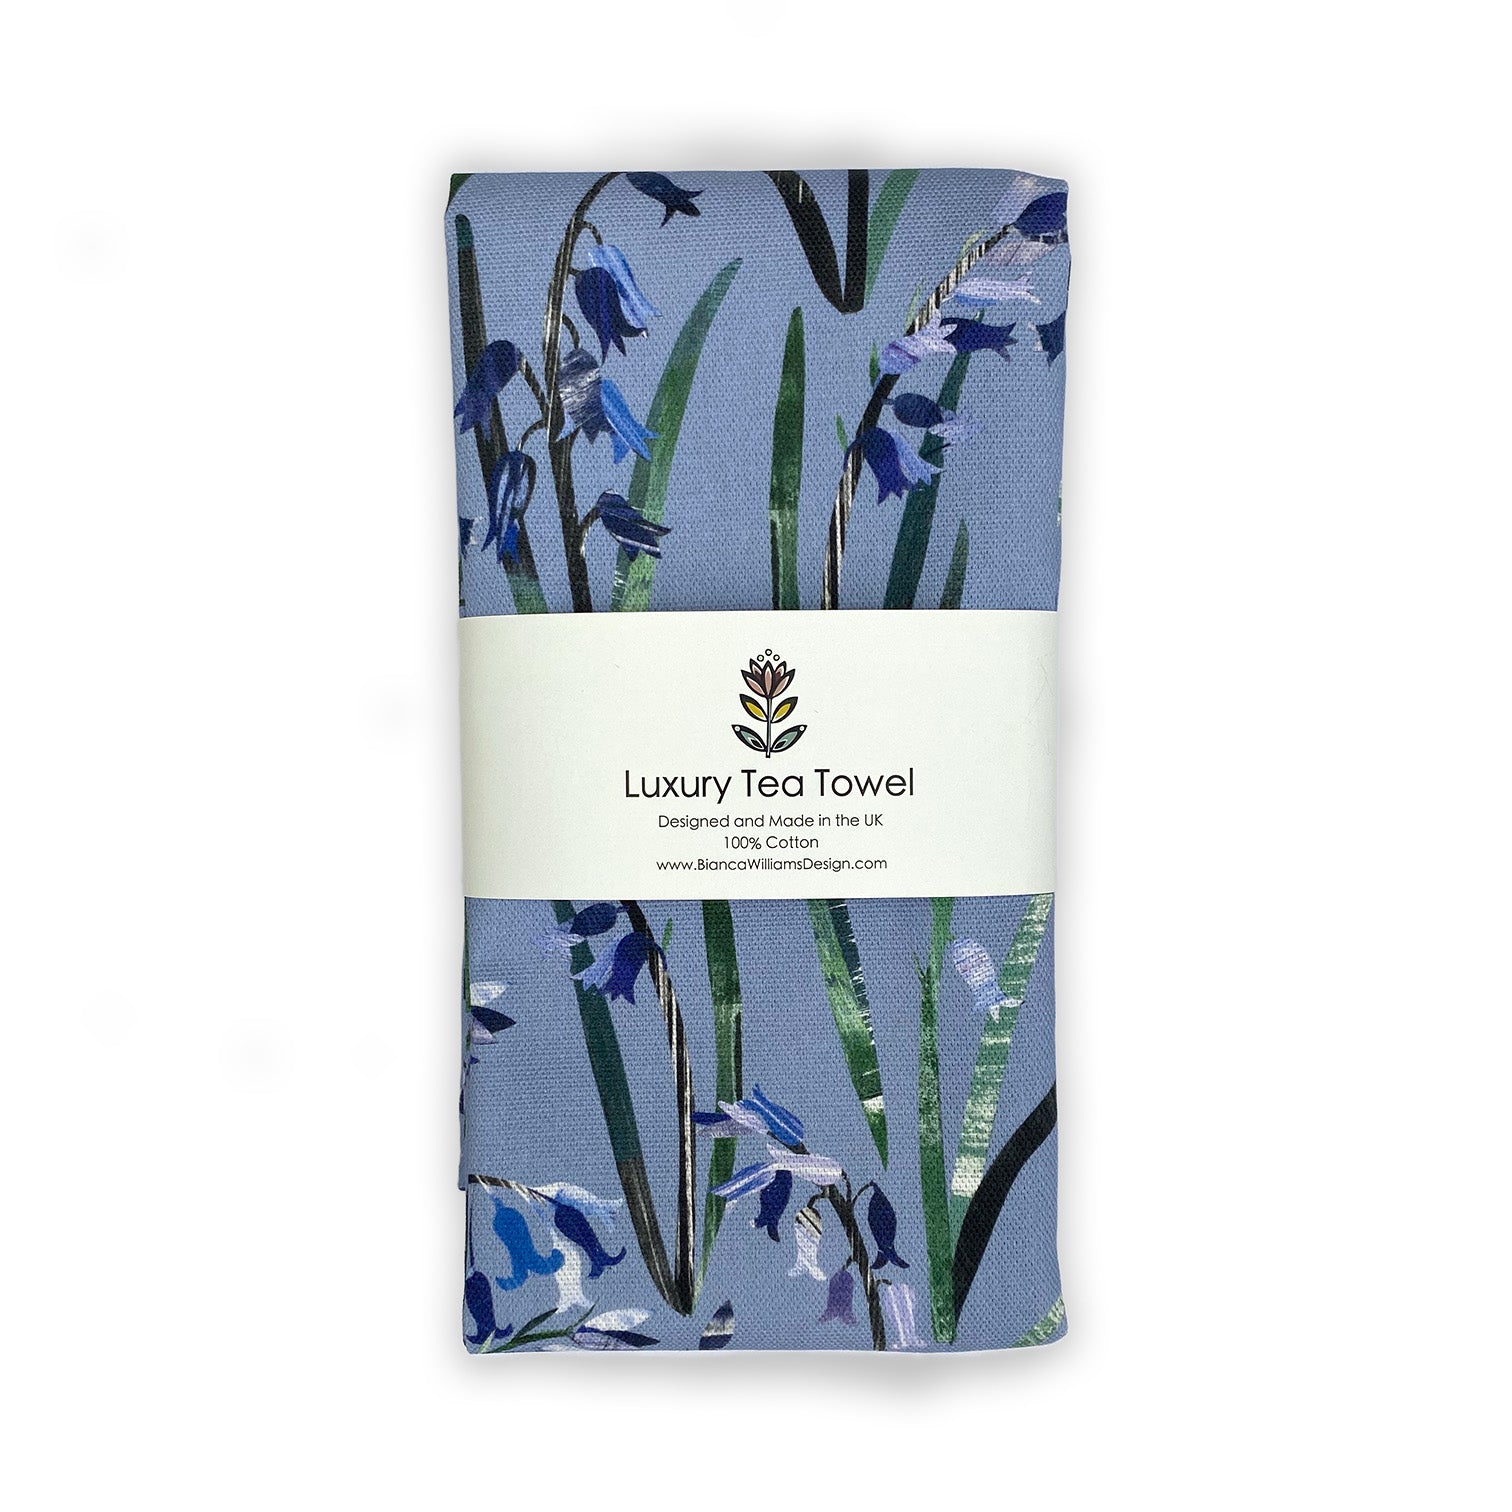 A Light Blue Bluebell tea towel shown in Branded belly band packaging on a plain white background.